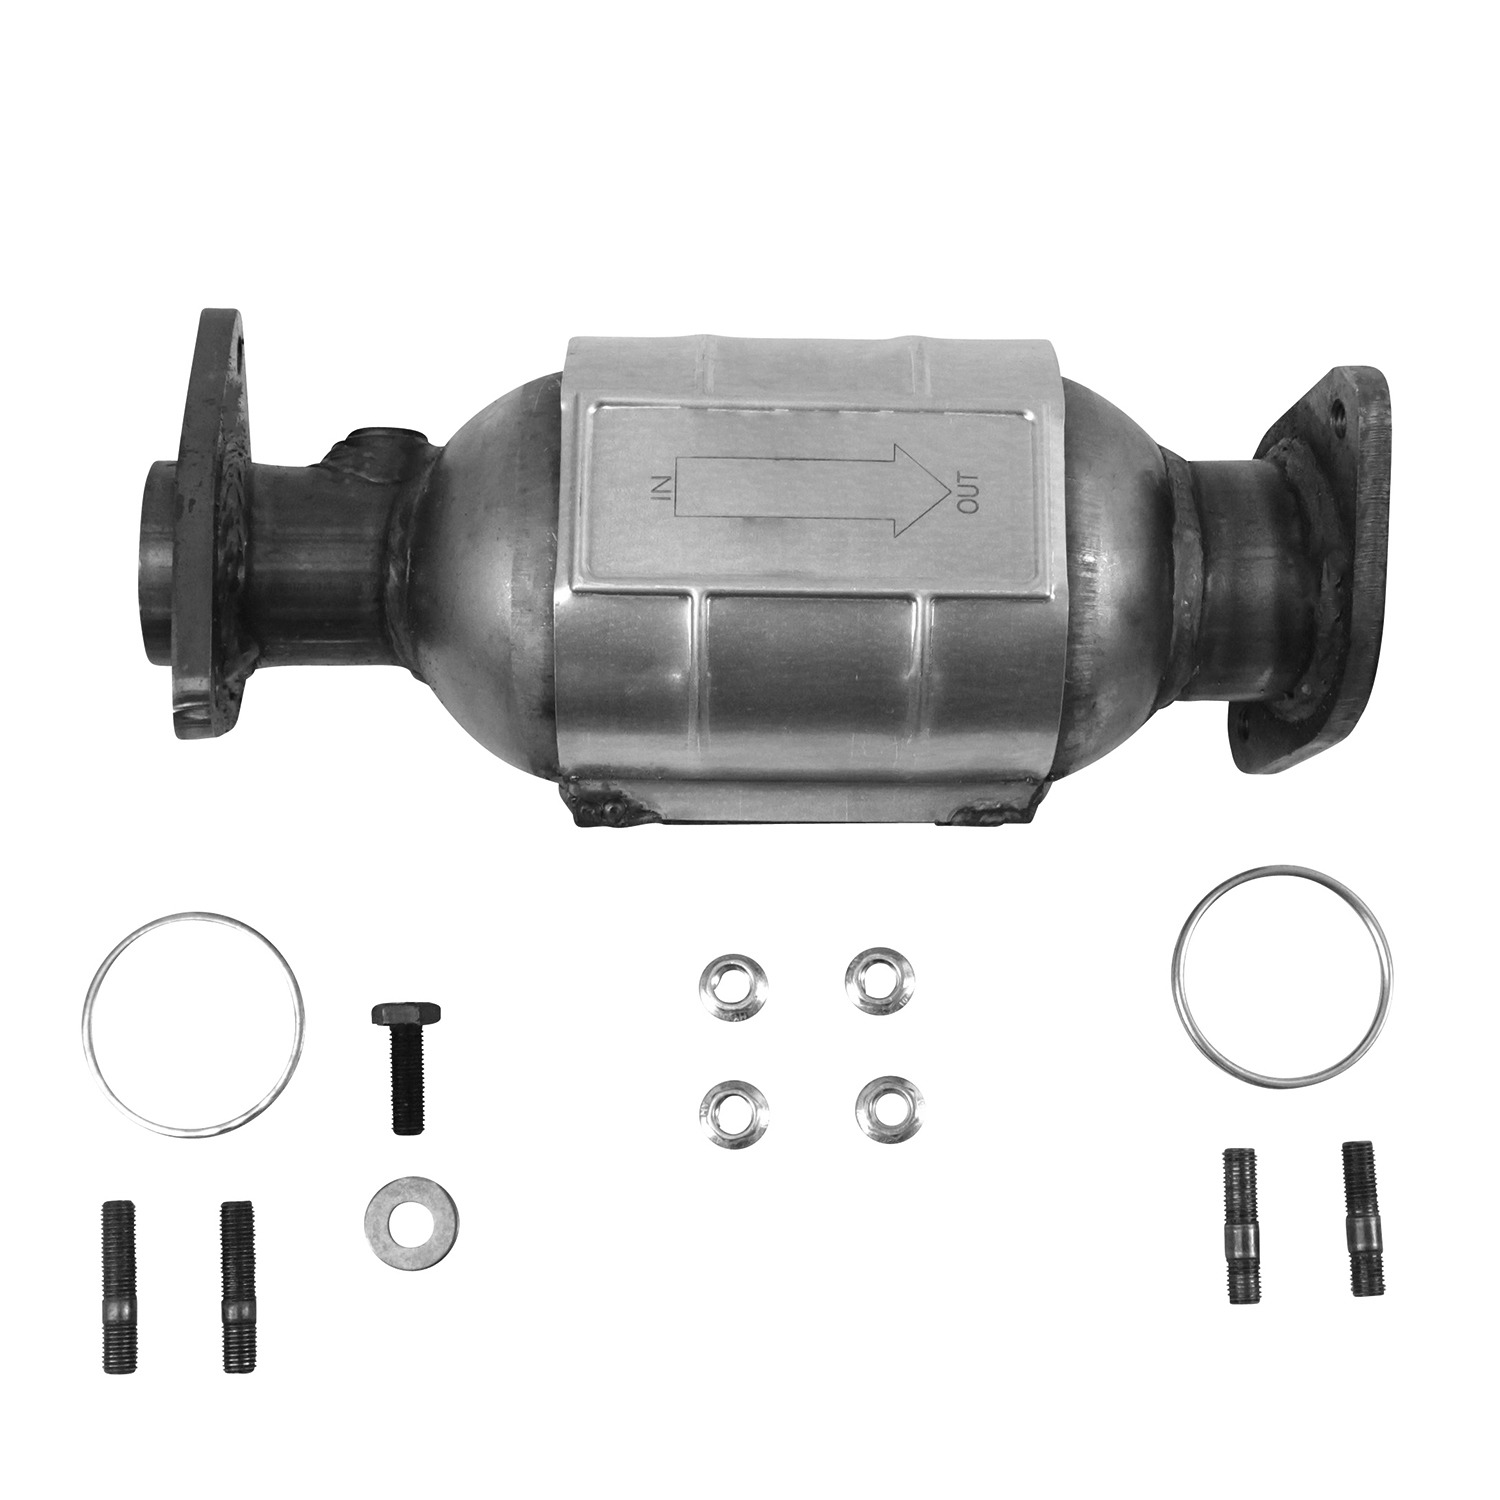 Fits:2005-2016  Nissan Frontier with 4.0L Engine/2012-2016 Nissan NV1500 with 4.0L Engine/2012-2016 Nissan NV2500 with 4.0L Engine/2012-2017 Nissan NV3500 with 4.0L Engine/2005-2012 Nissan Pathfinder with  4.0L Engine/2005-2015 Nissan Xterra with 4.0L Engine/2009-2012  6 Cyl.  Suzuki Equator with 4.0L Engine